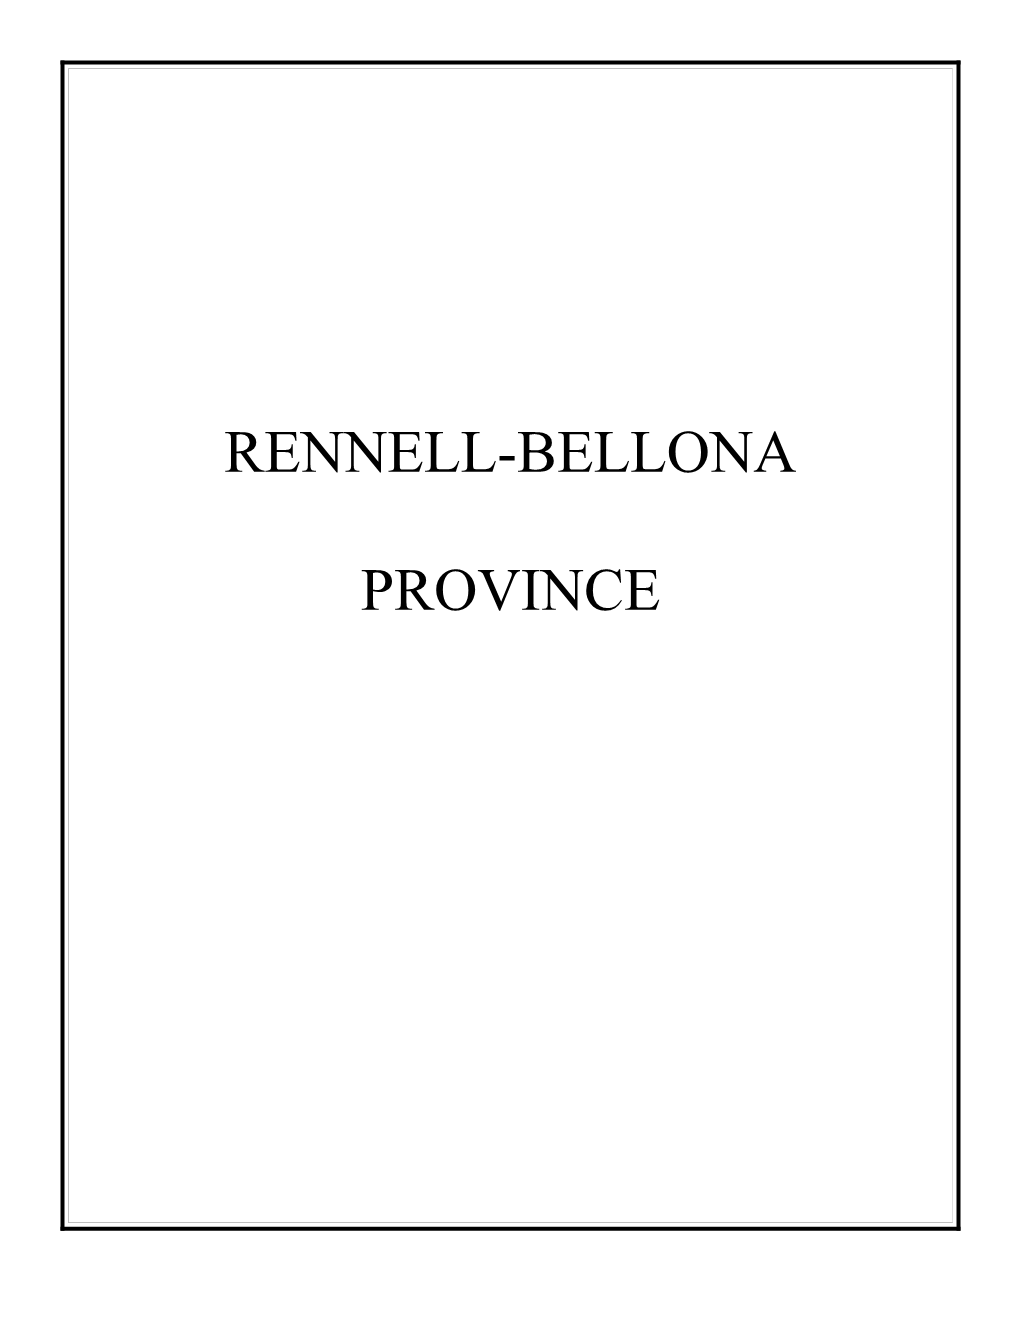 Rennell-Bellona